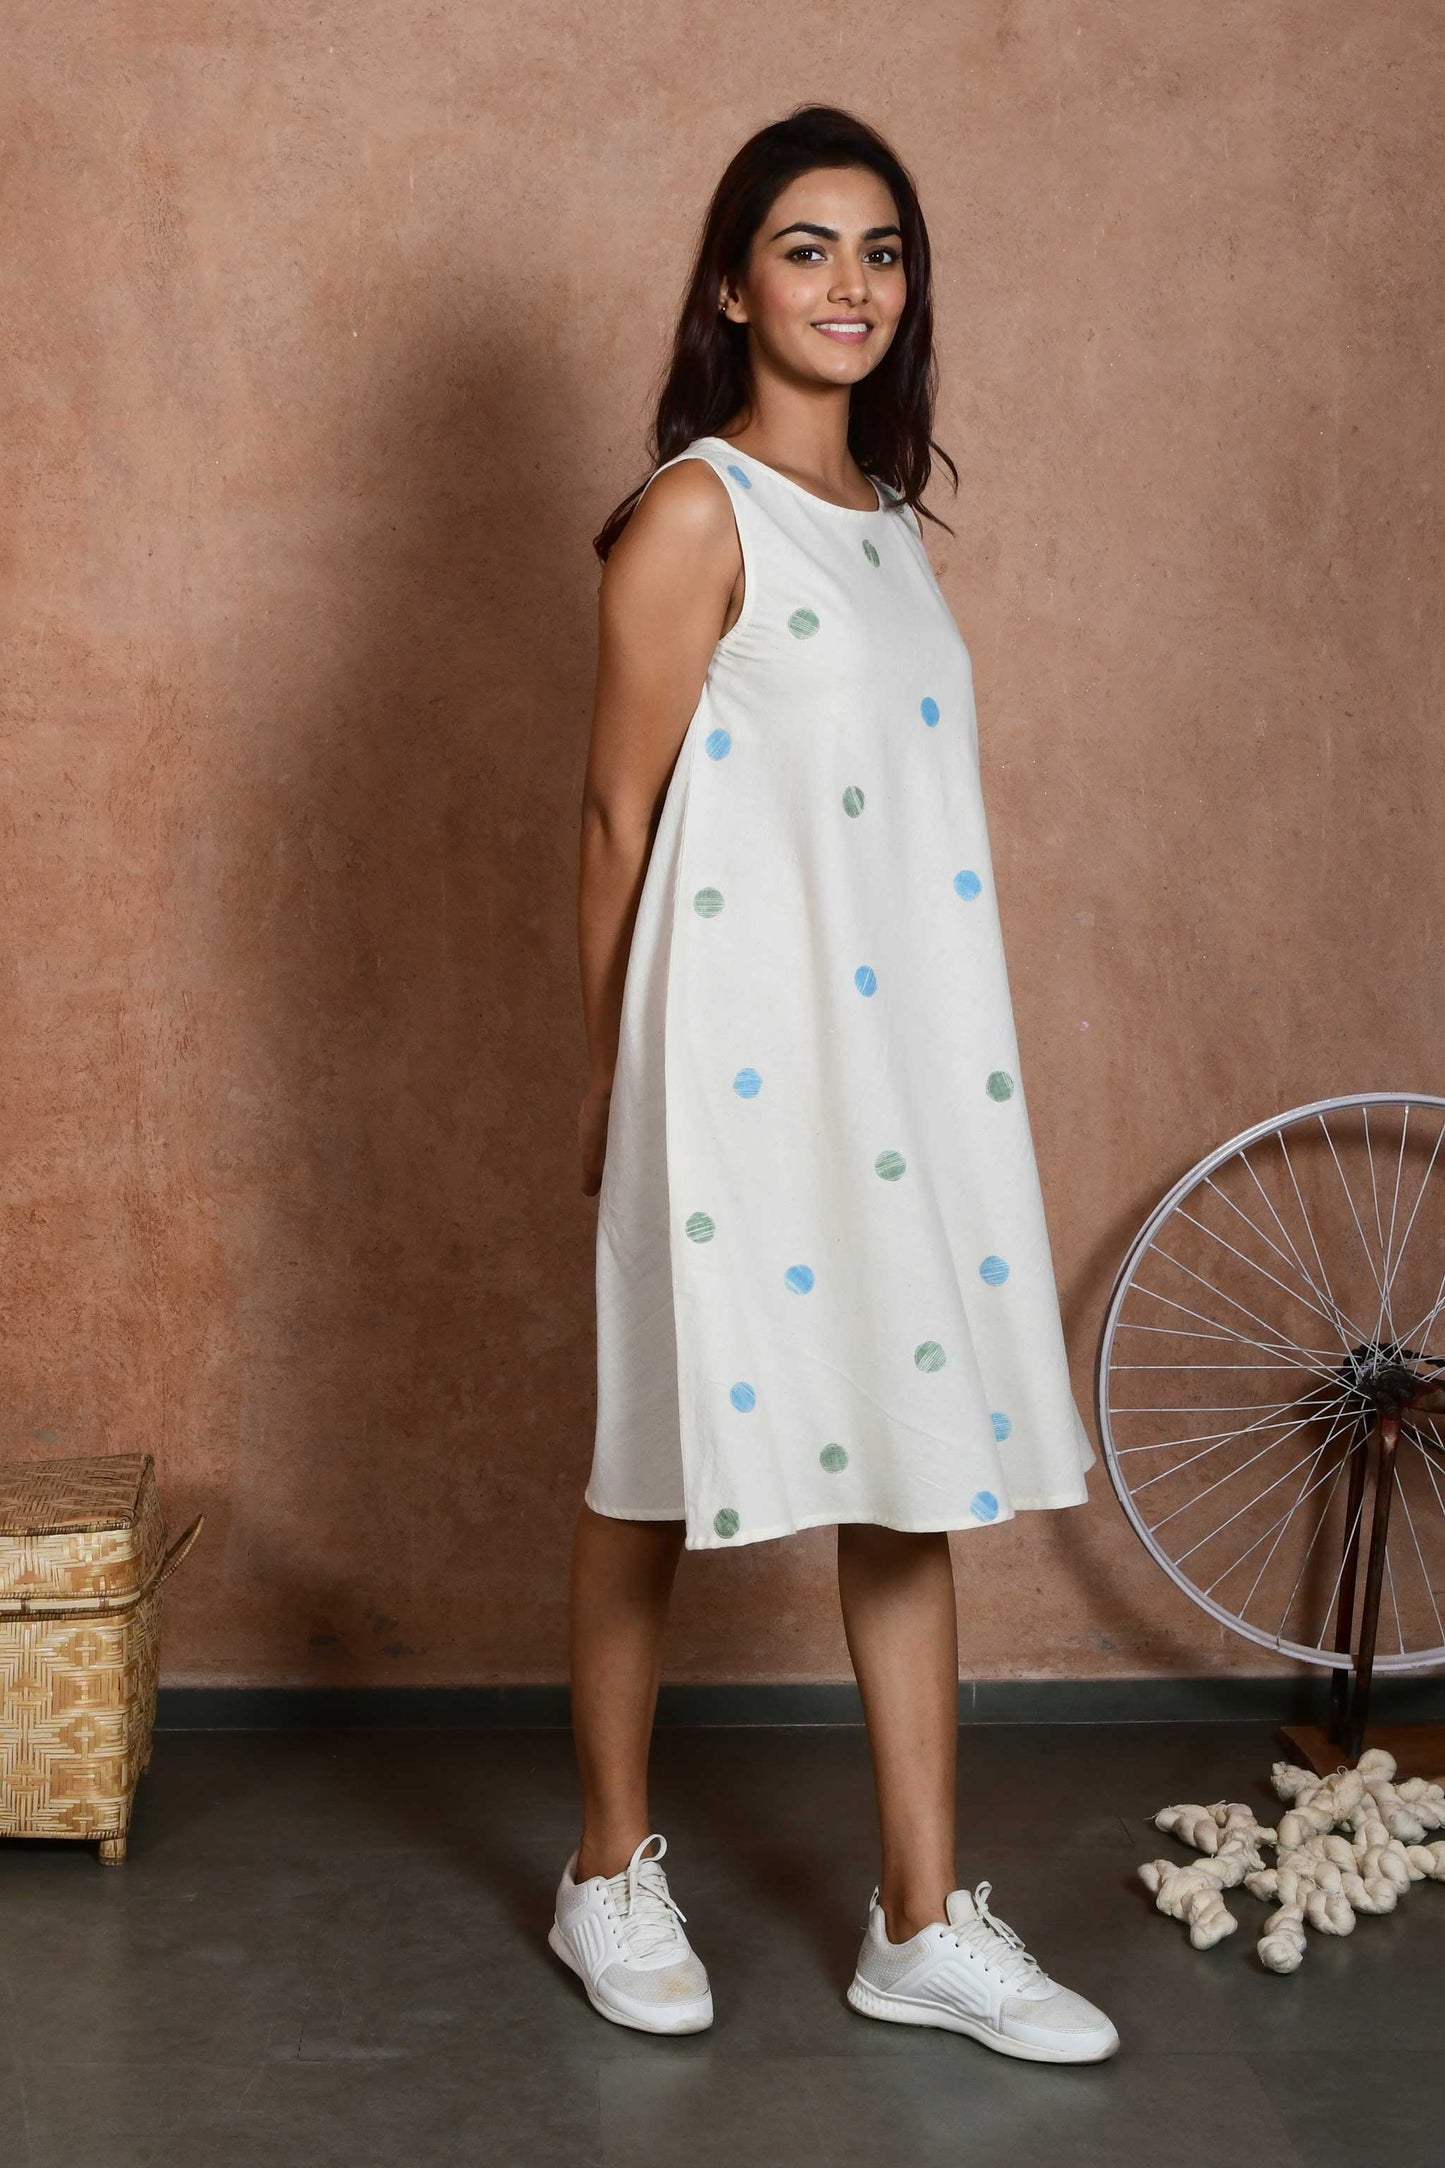 Three quarter pose of an indian model wearing a handspun handloom cotton sleeveless dress that is knee length with green and blue polka dot patches.